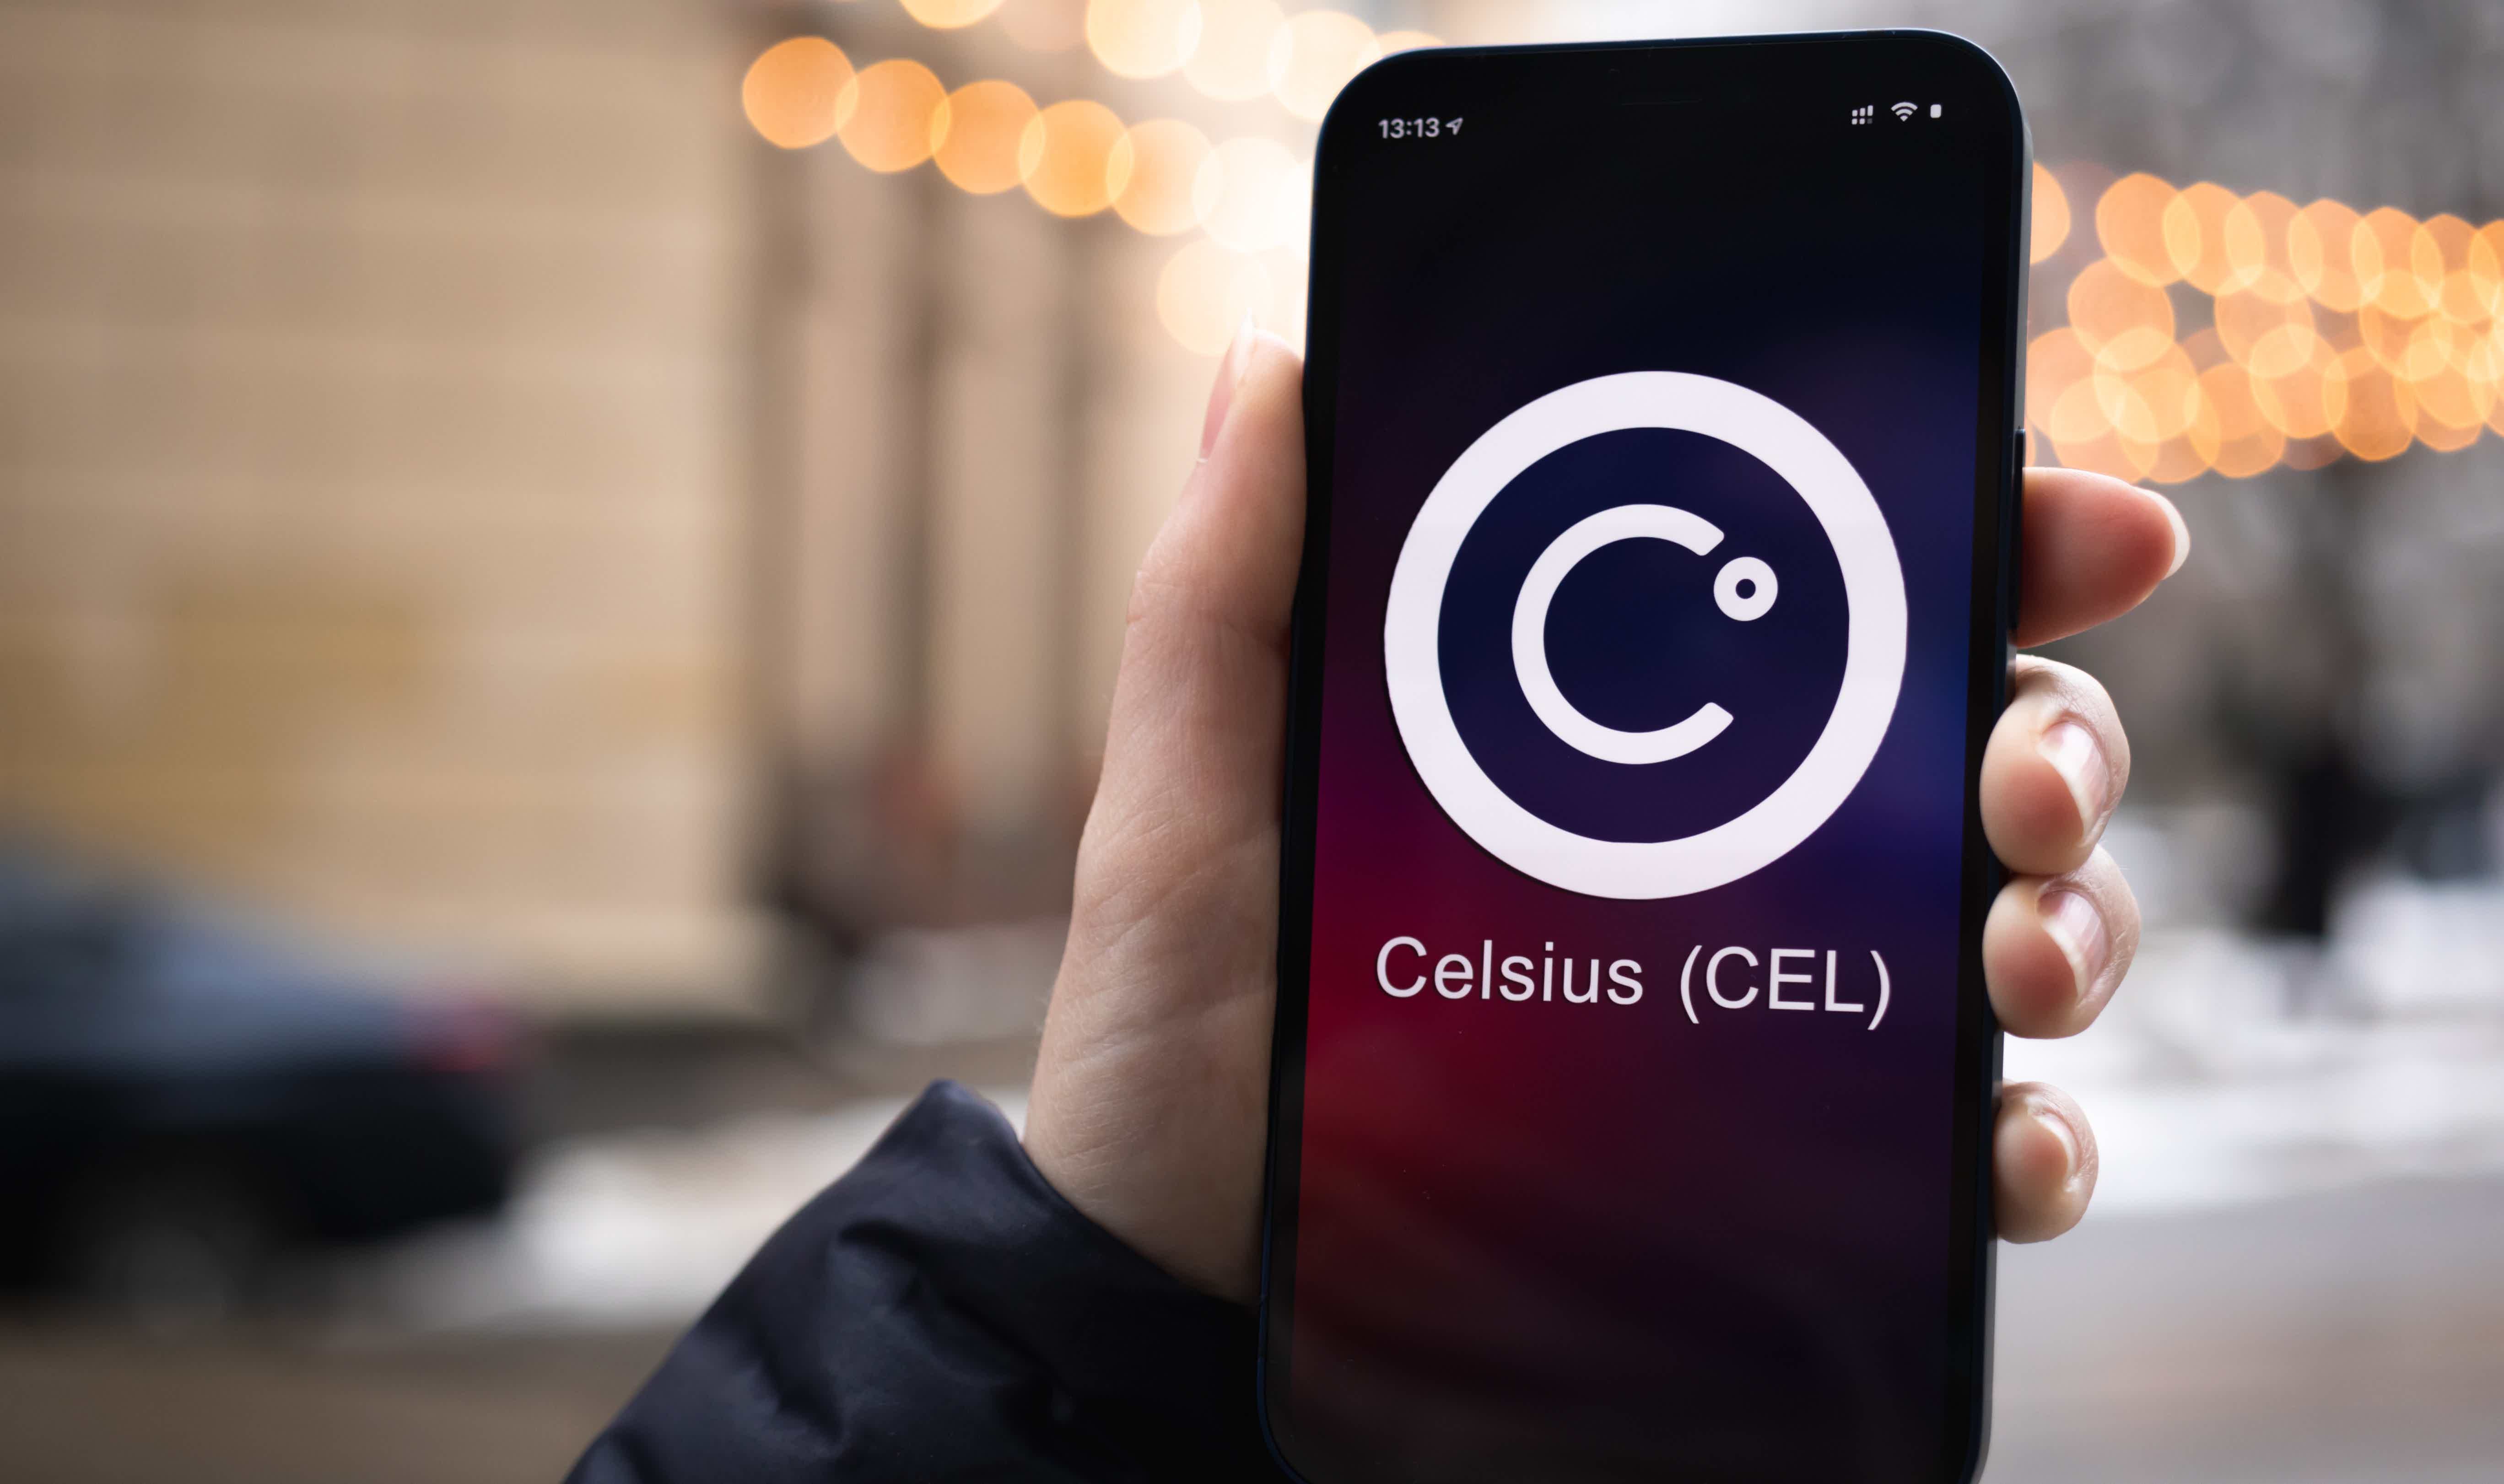 See how to buy Celsius online. Source: AdobeStock.